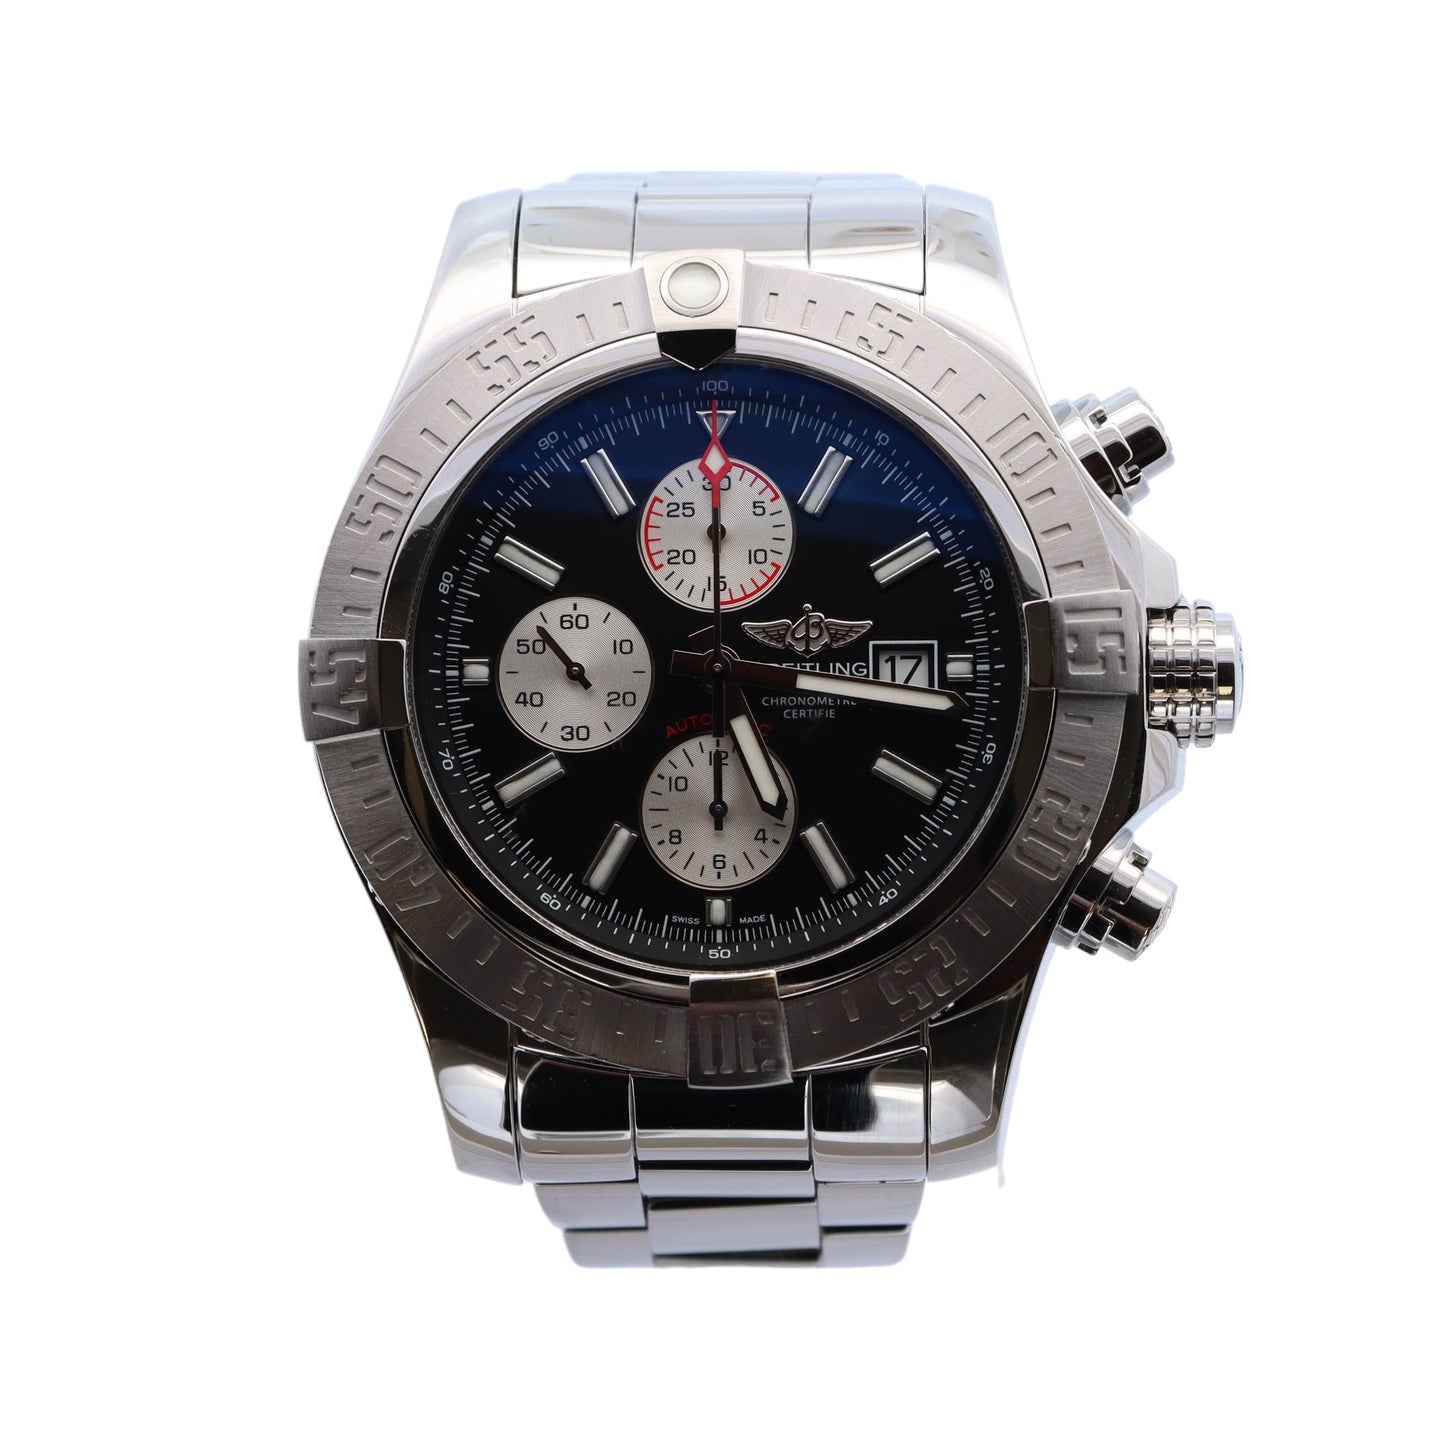 Breitling Super Avenger II Stainless Steel 48mm Black Chronograph Dial Watch Reference #: A13371 - Happy Jewelers Fine Jewelry Lifetime Warranty